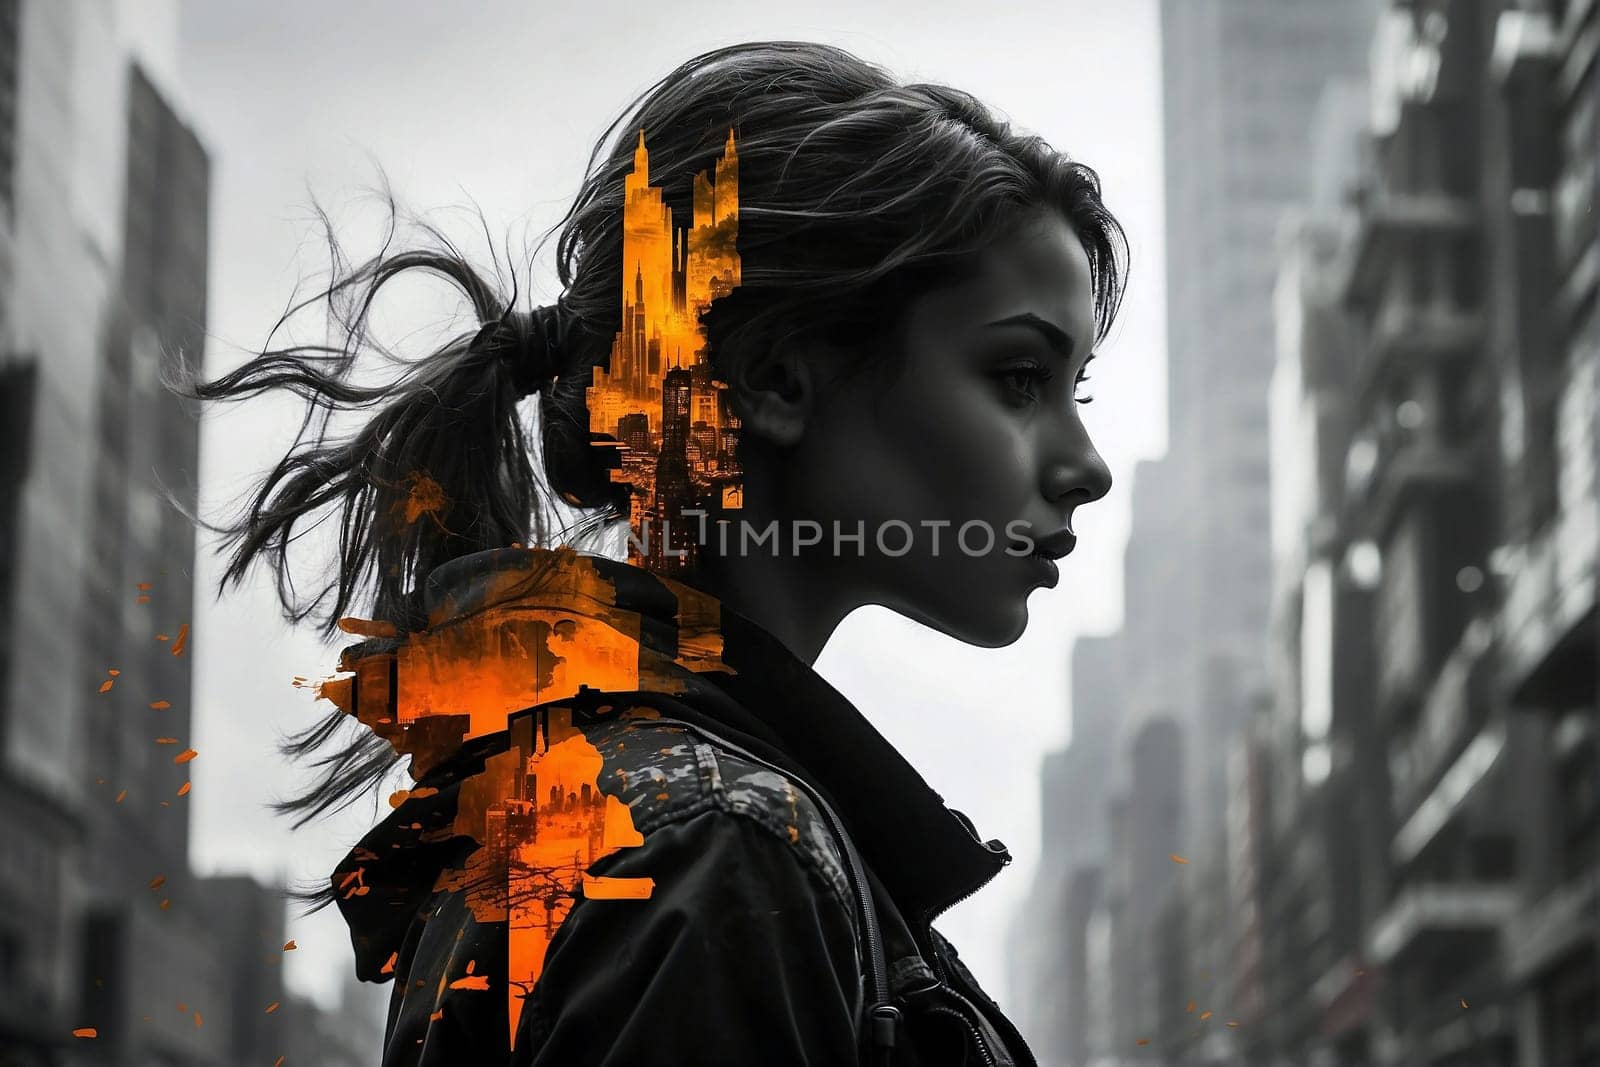 A woman stands tall in front of a bustling city skyline, taking in the urban landscape.